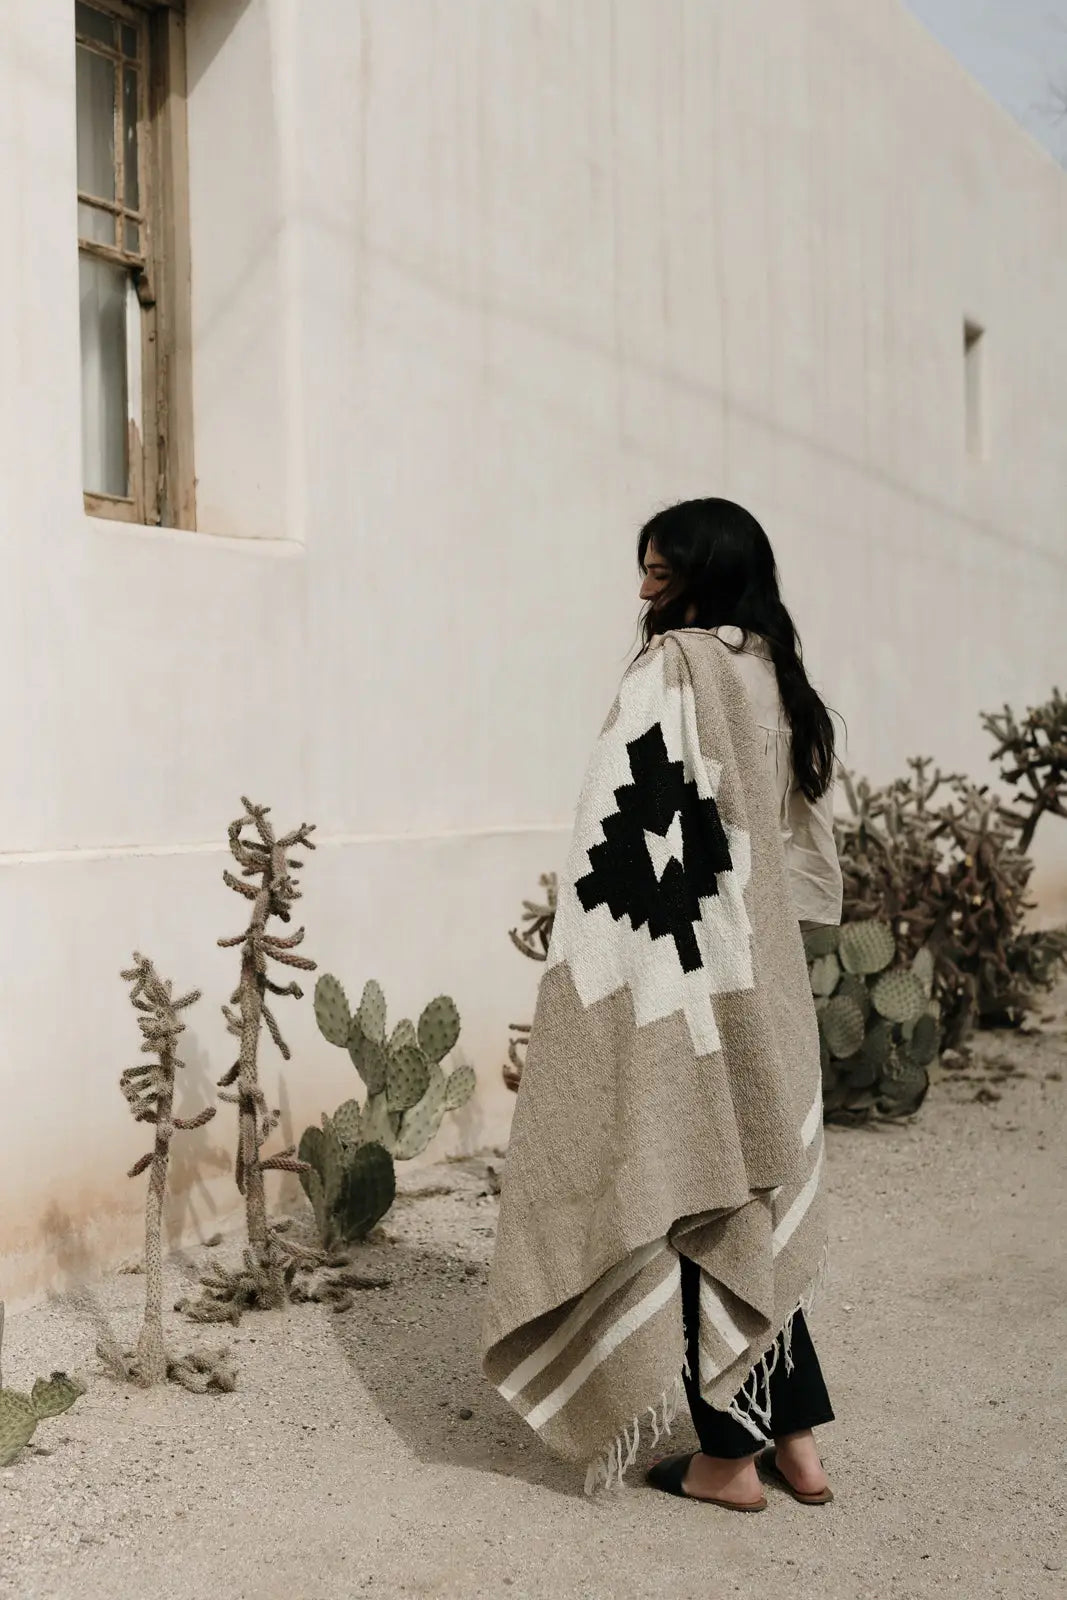 Taos Two | Handwoven Blanket